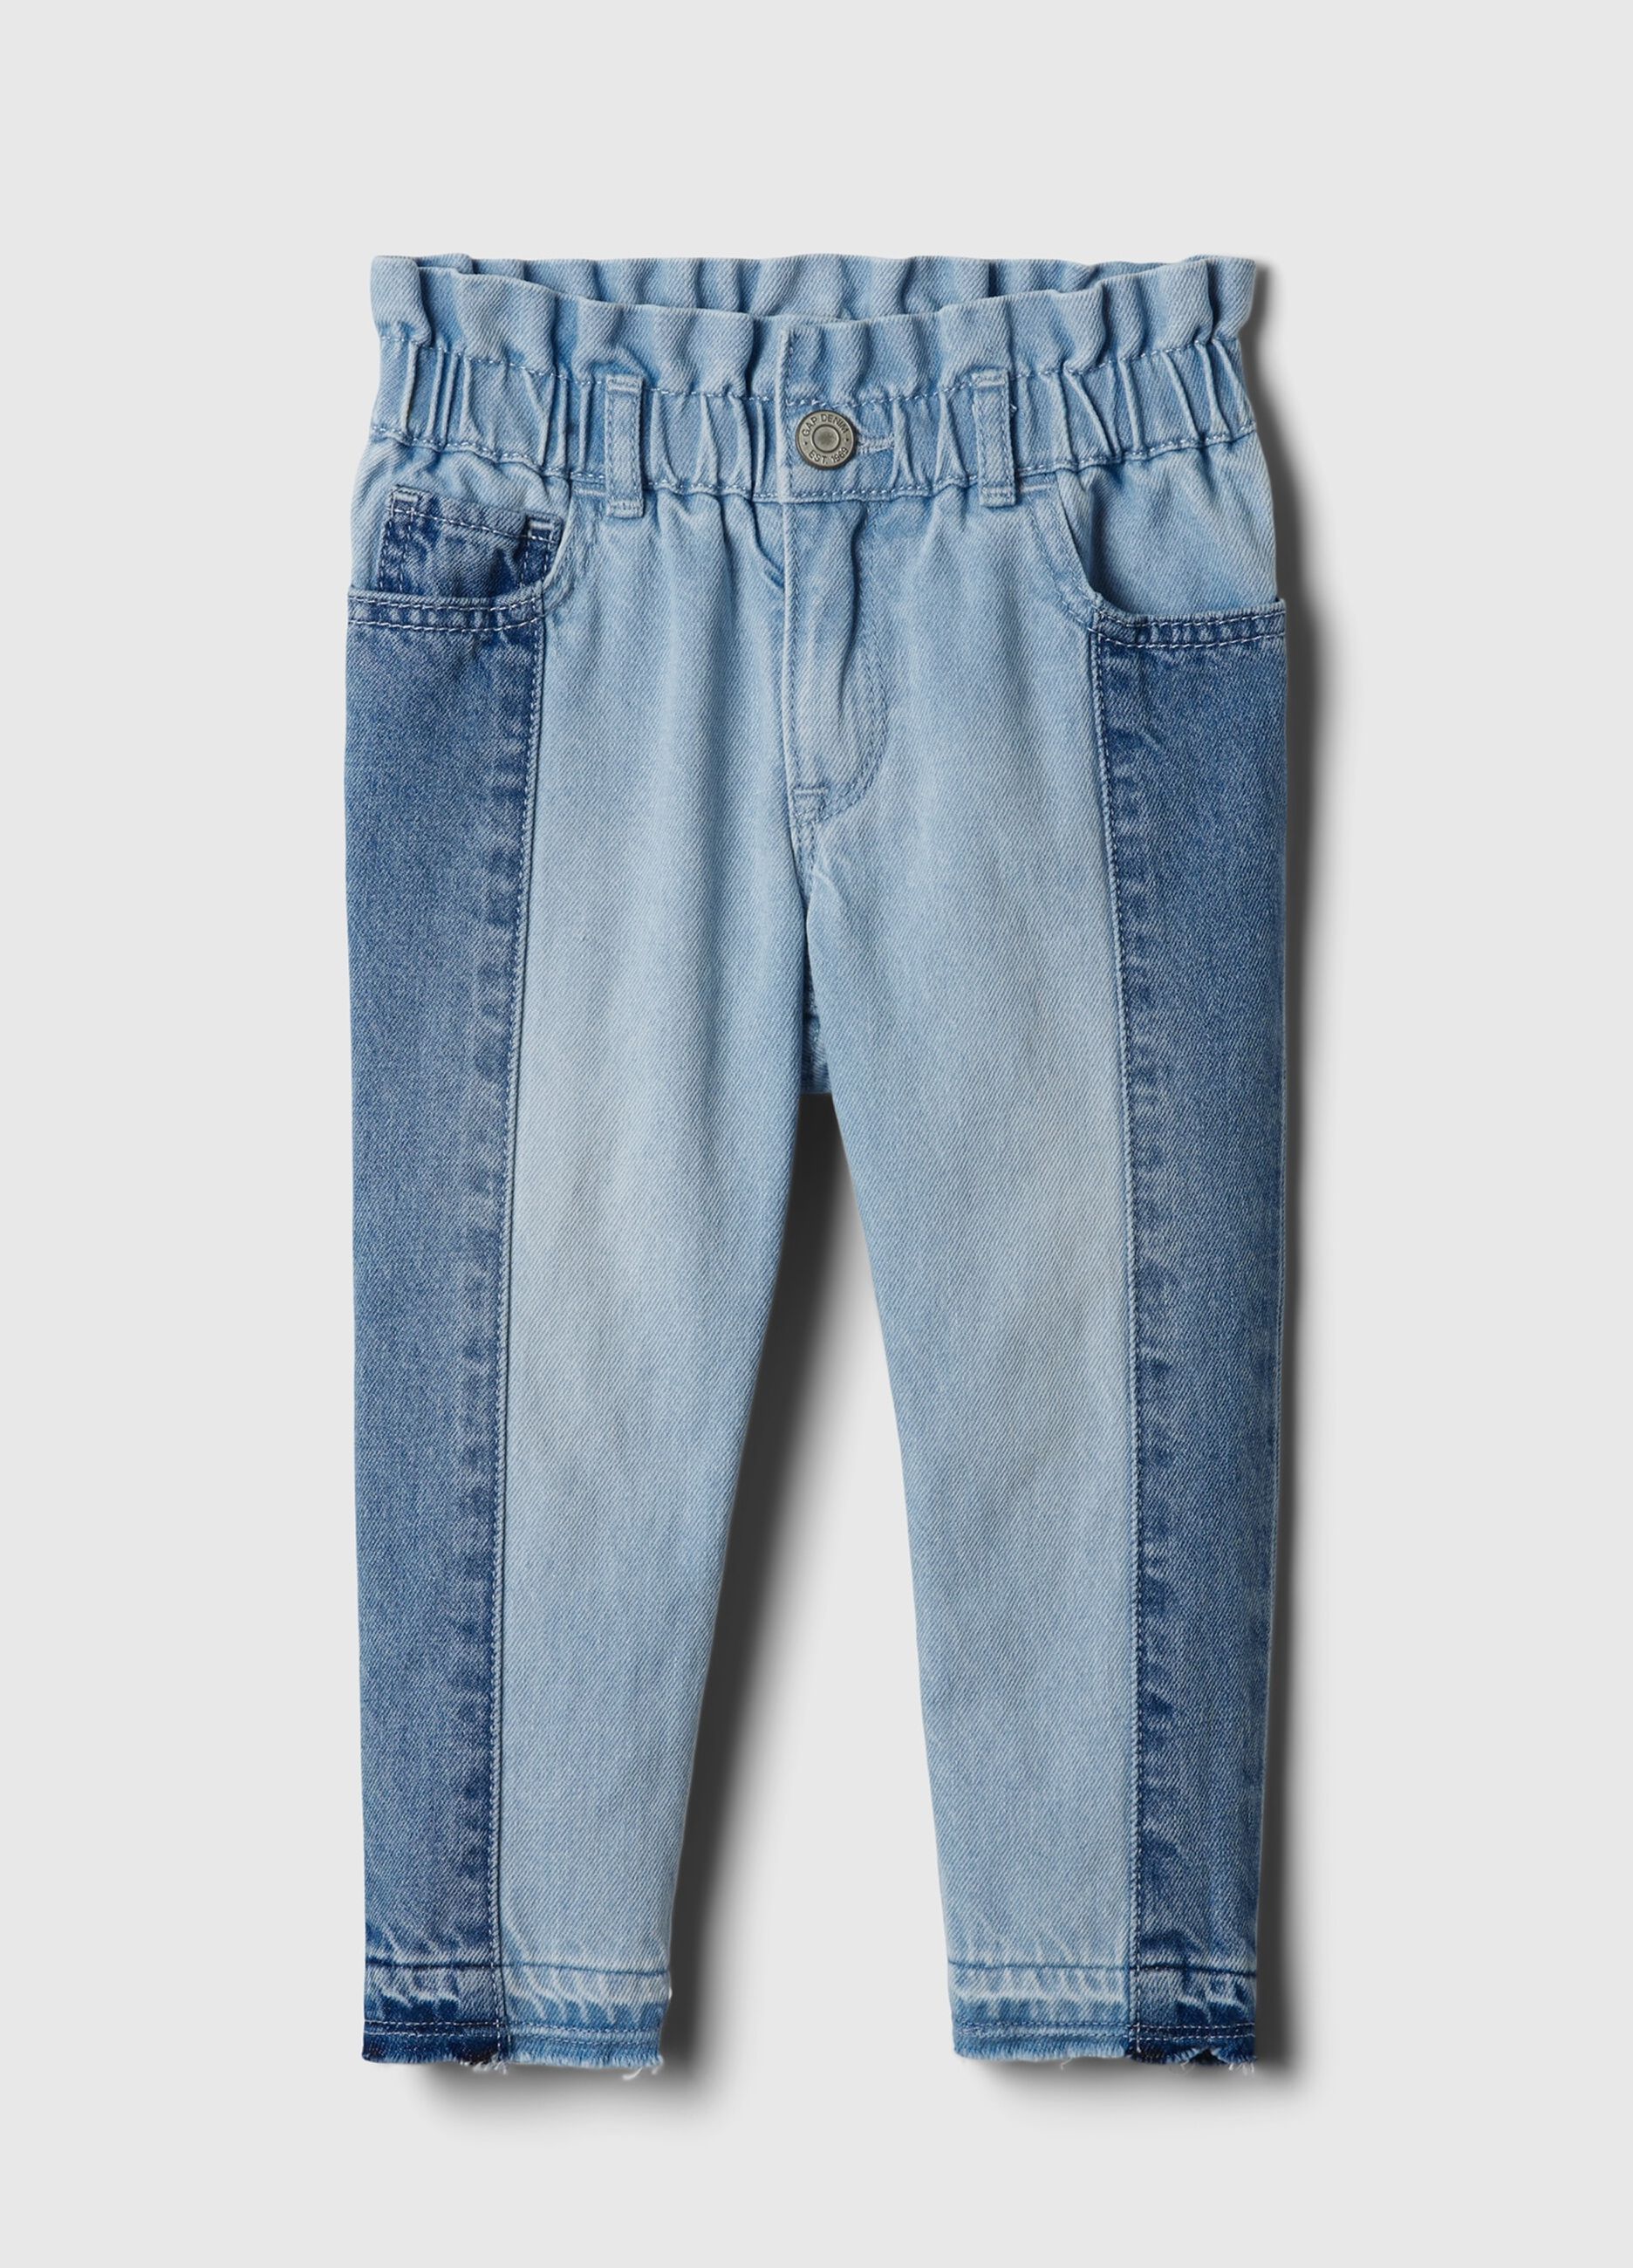 Mum-fit jeans with five pockets